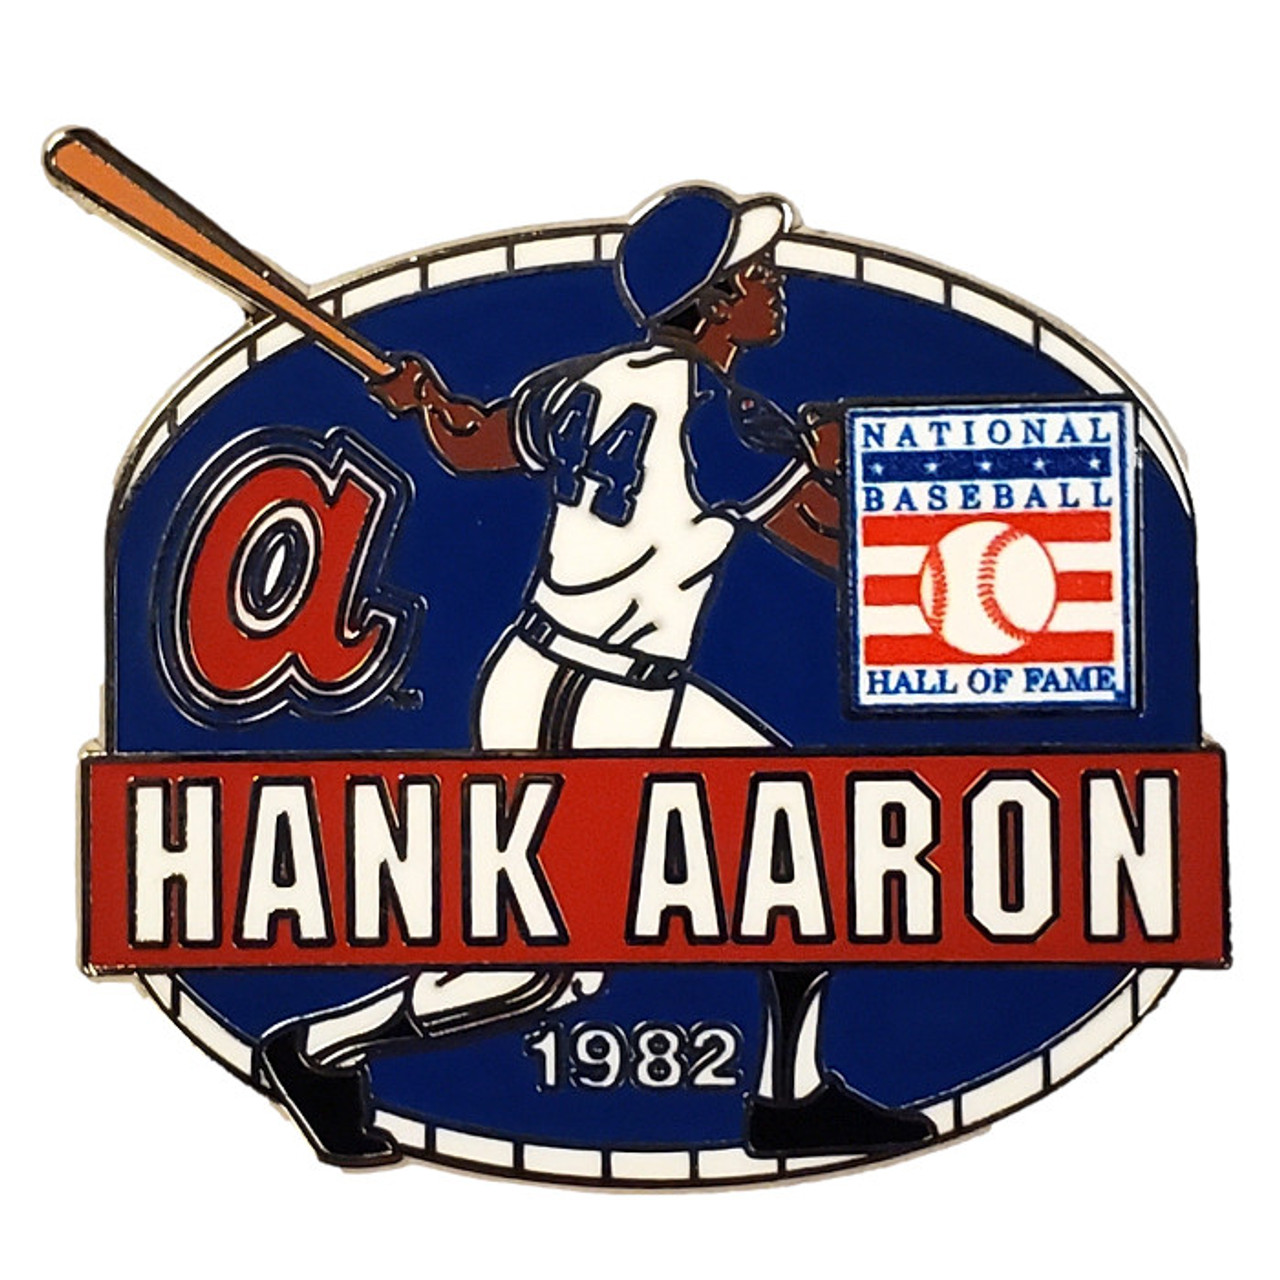 Hank Aaron Atlanta Braves Hall of Fame Class of 1982 Collector's Pin